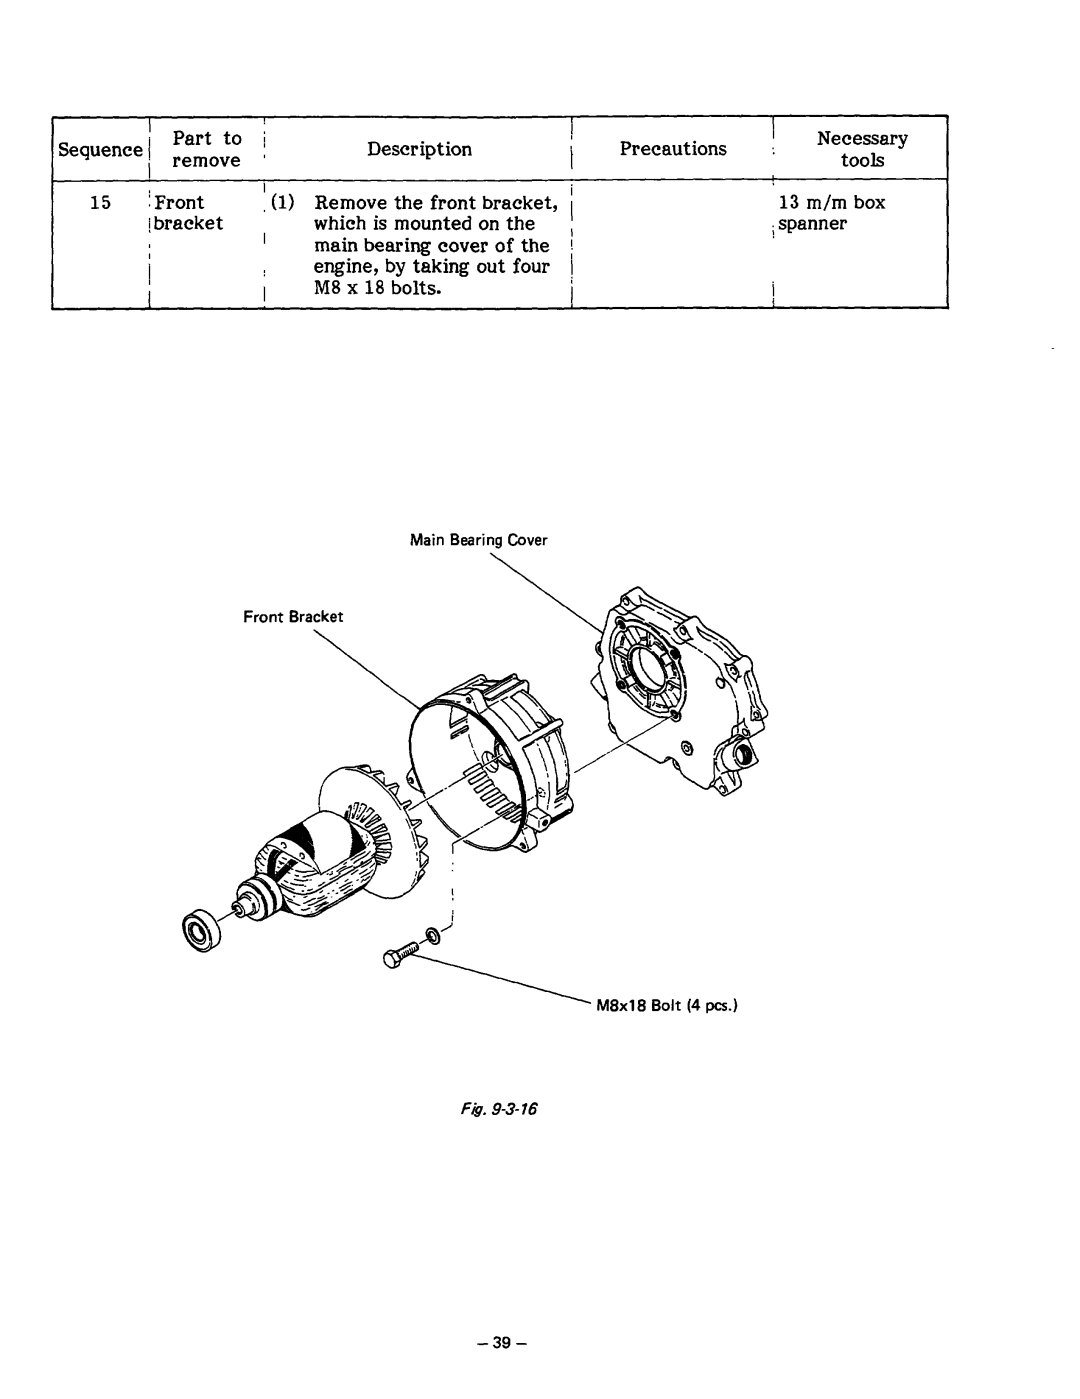 Subaru Robin Power Products R1200 service manual Part to / Sequencej remove ’ 